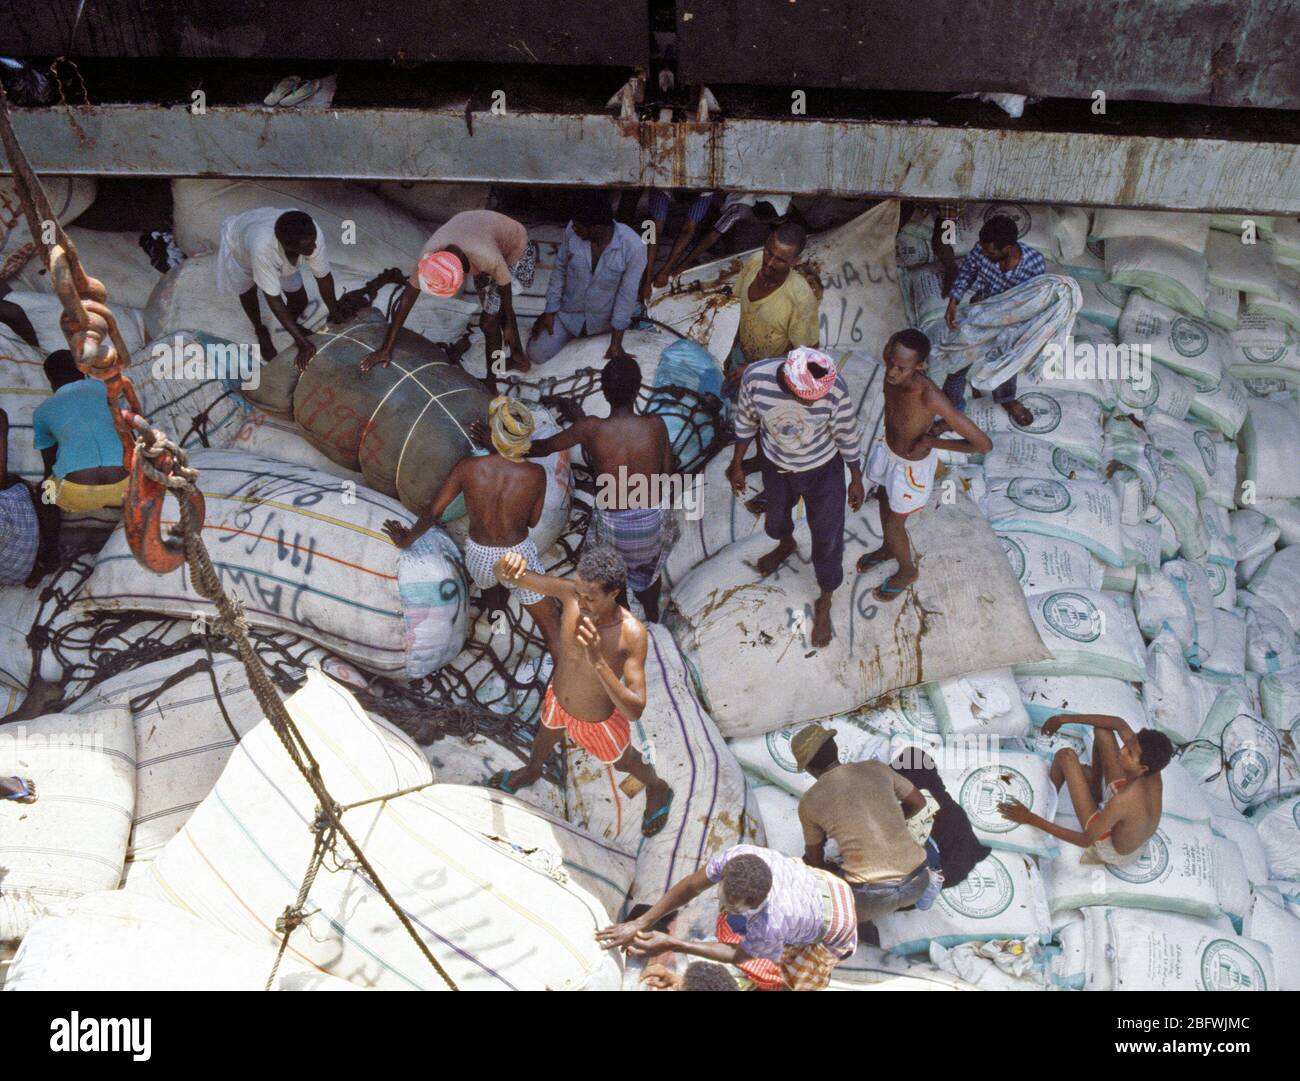 1993 - Rice and other relief supplies rest in the hold of a Saudi Arabian freighter as Somalis work to off-load at the seaport.  The Saudis are providing relief supplies to the Somali people. Stock Photo